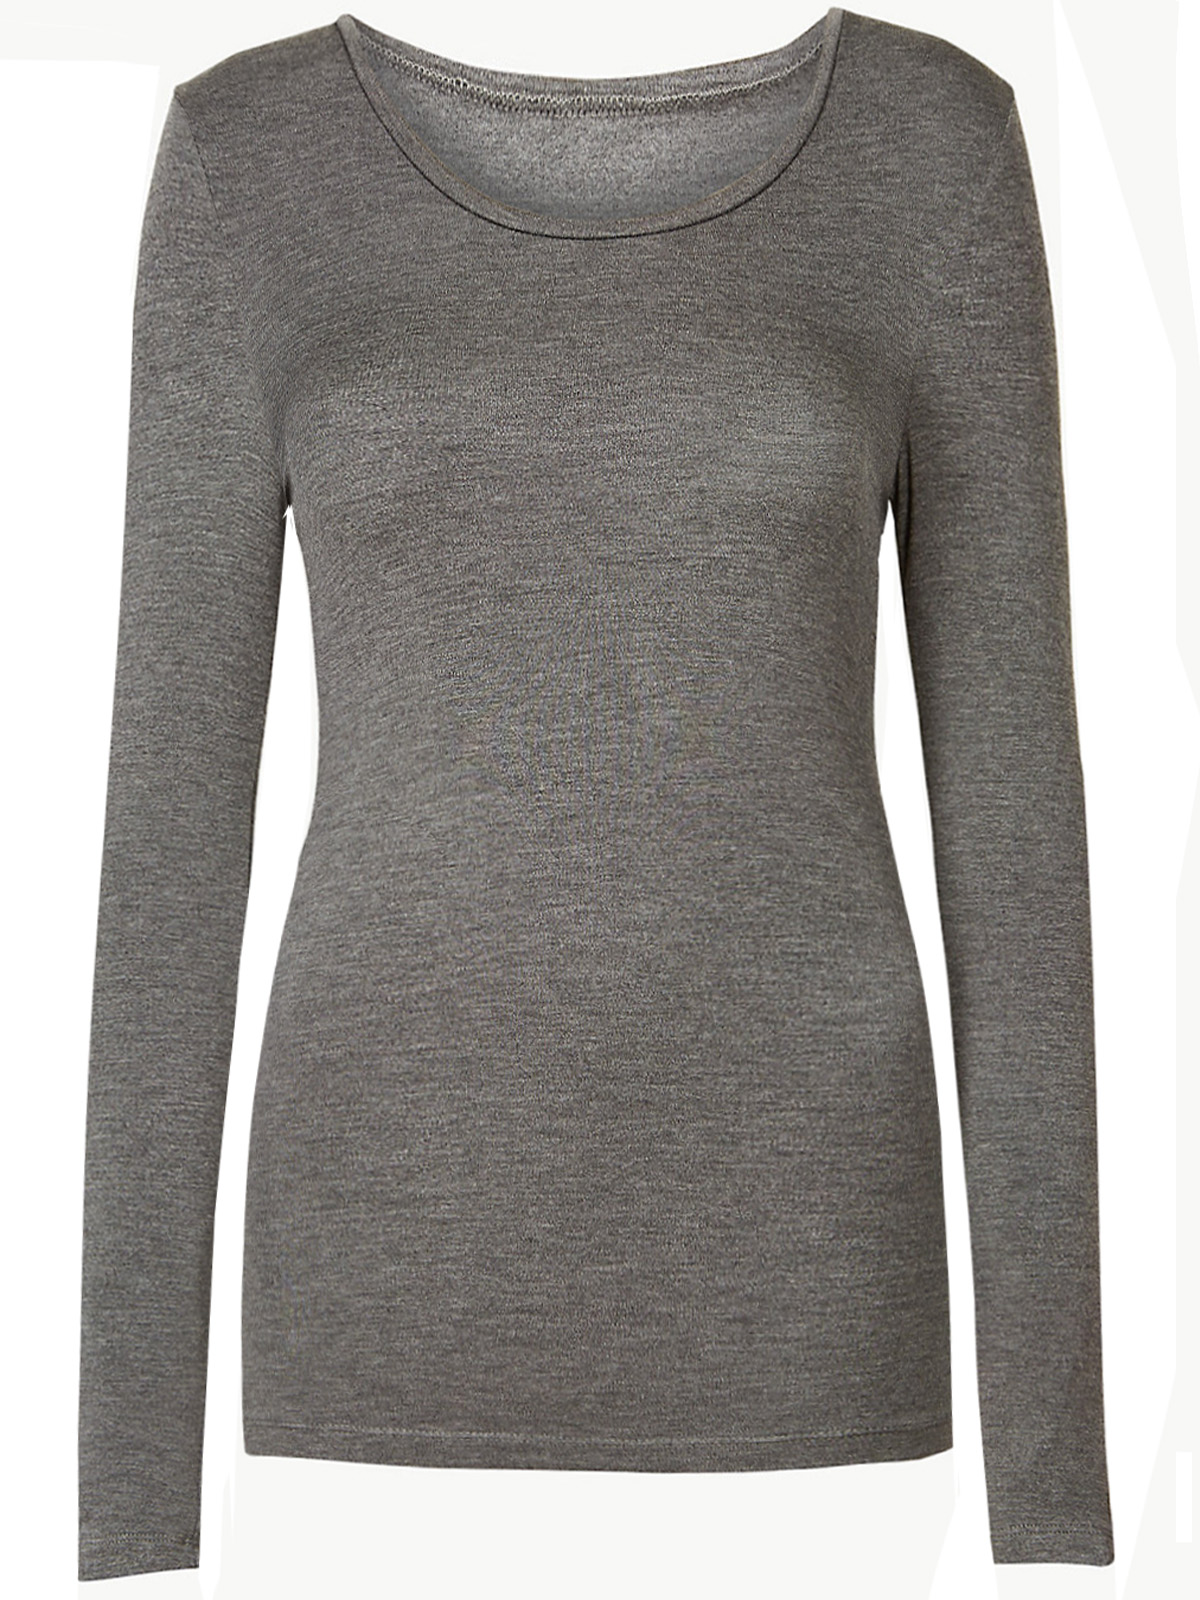 Marks and Spencer - - M&5 CHARCOAL Long Sleeve Heatgen Plus Thermal Top ...